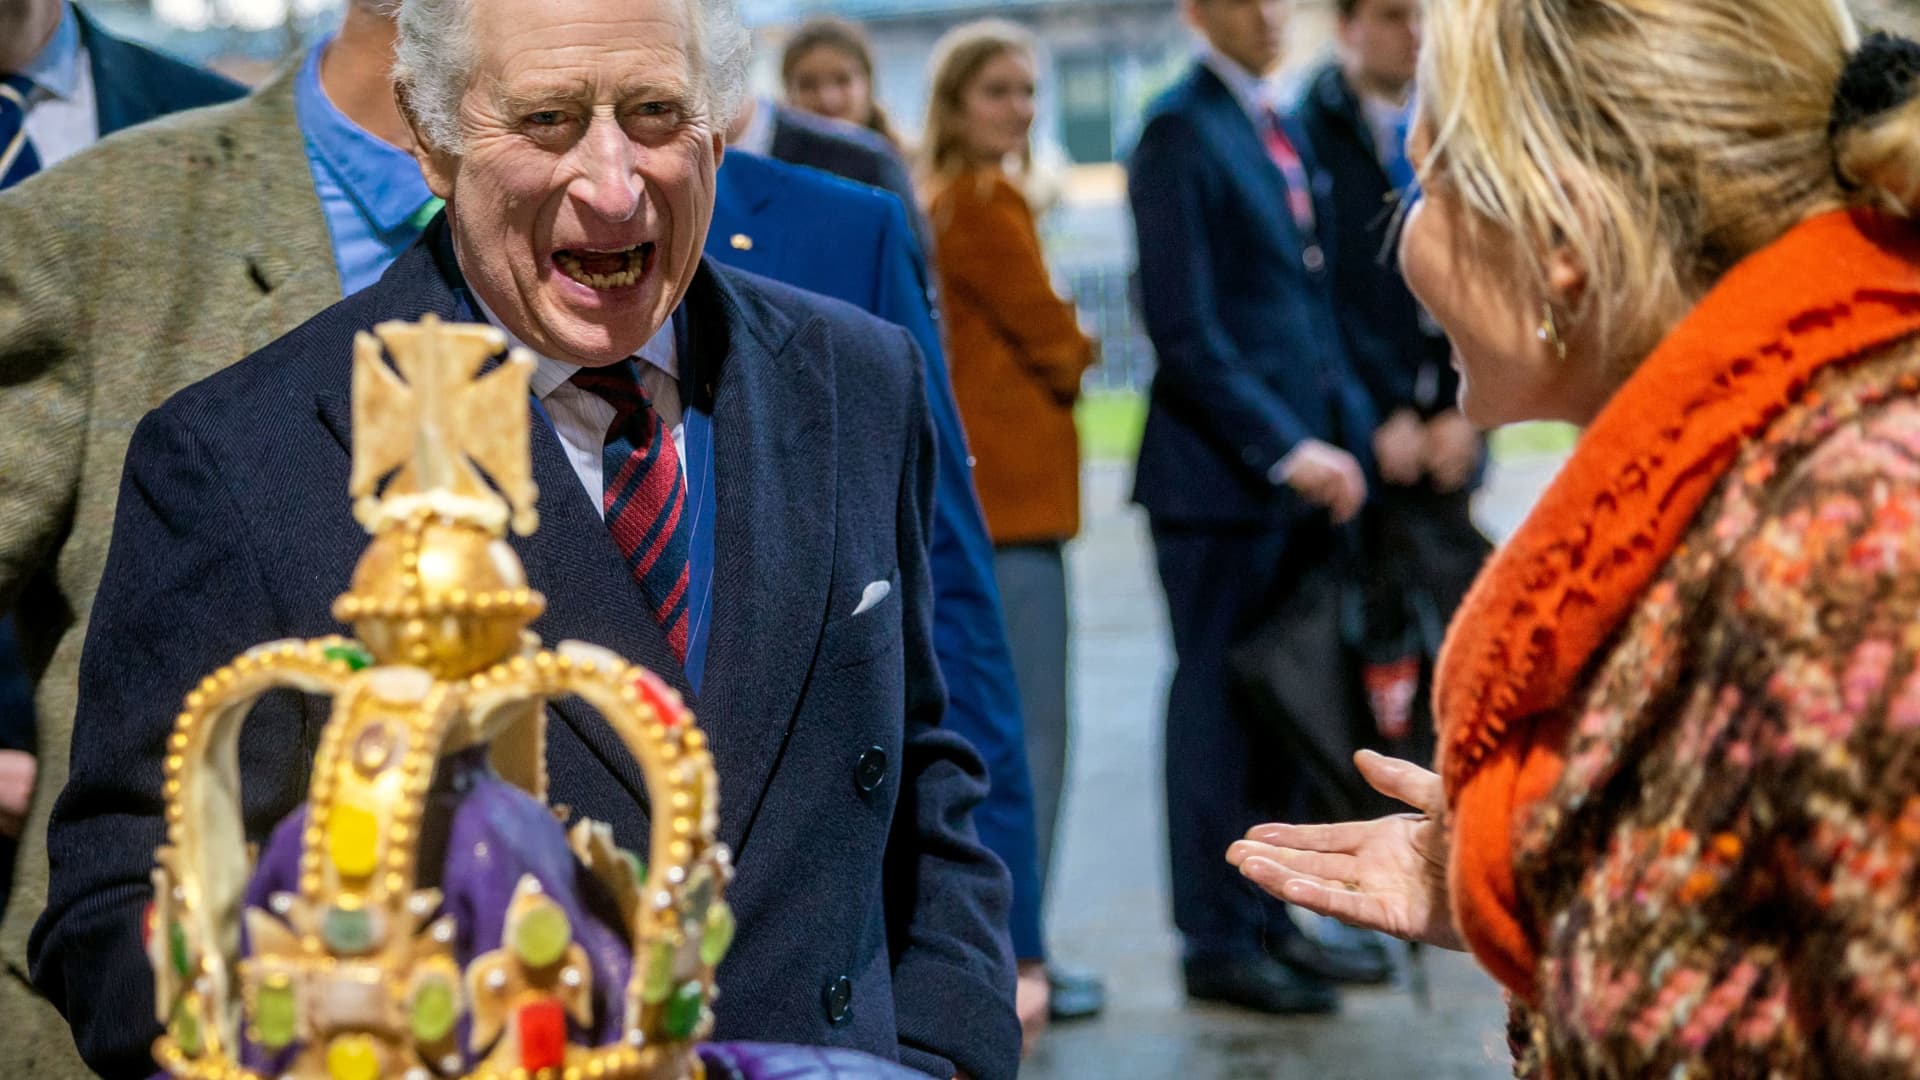 March 30, 2023, Brandenburg, Brodowin: King Charles III. stands next to a cake made especially for his visit in Brodowin ecovillage during the royal visit to Germany. 